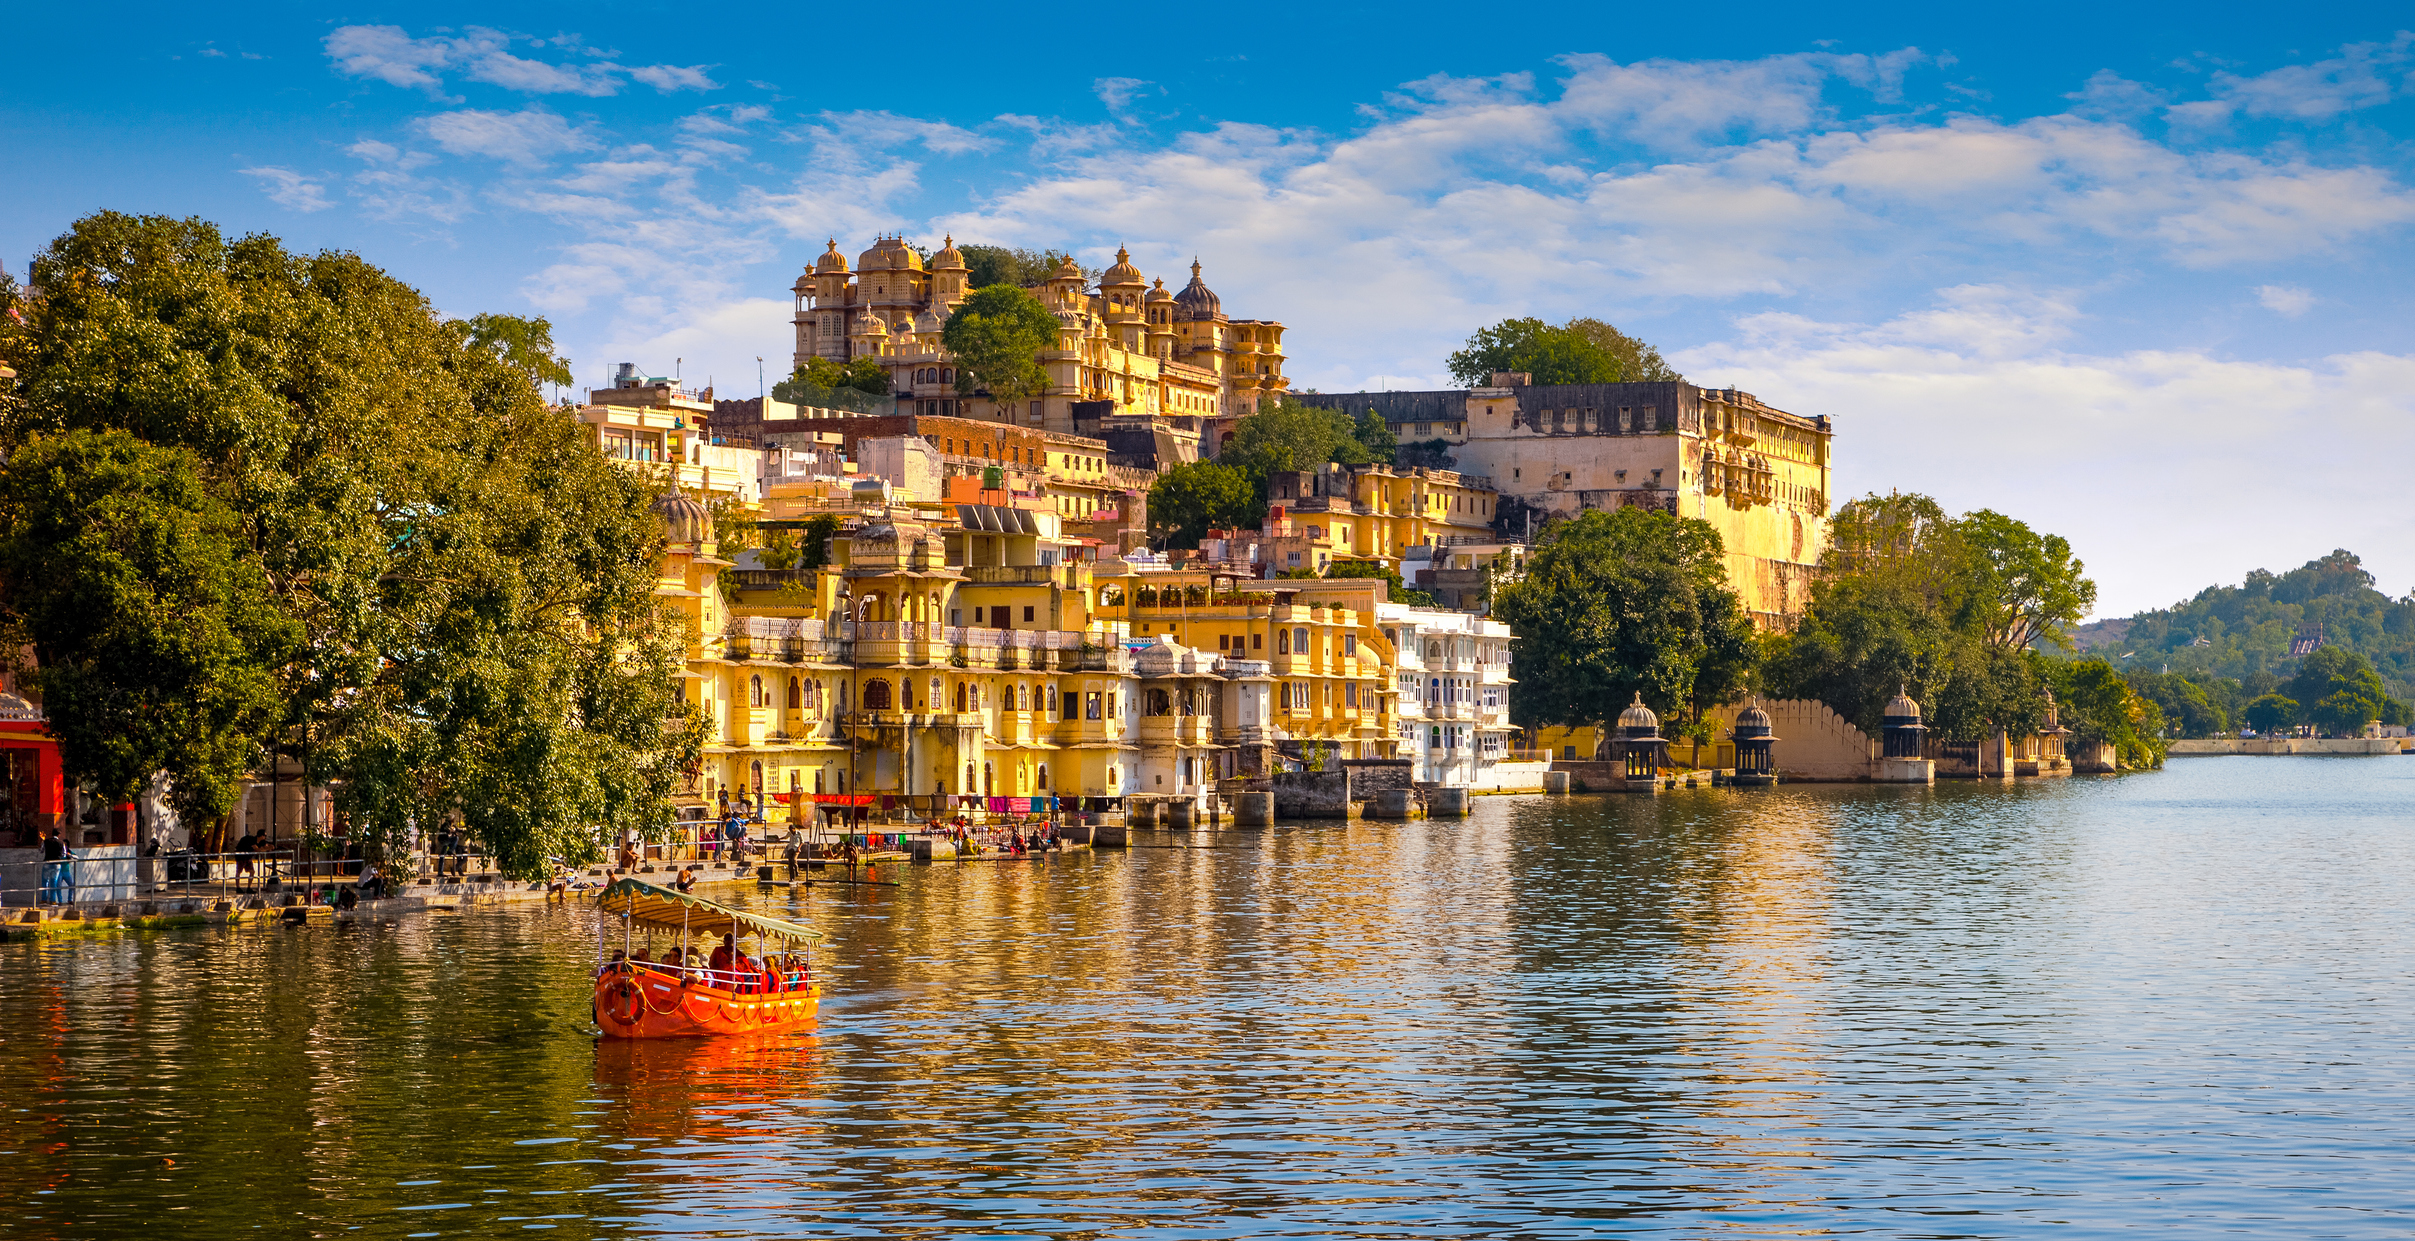 Experience extraordinary Indian sights like this view of City Palace on Lake Pichola in Udaipur when you take a tailor-made holiday with Alfred&.